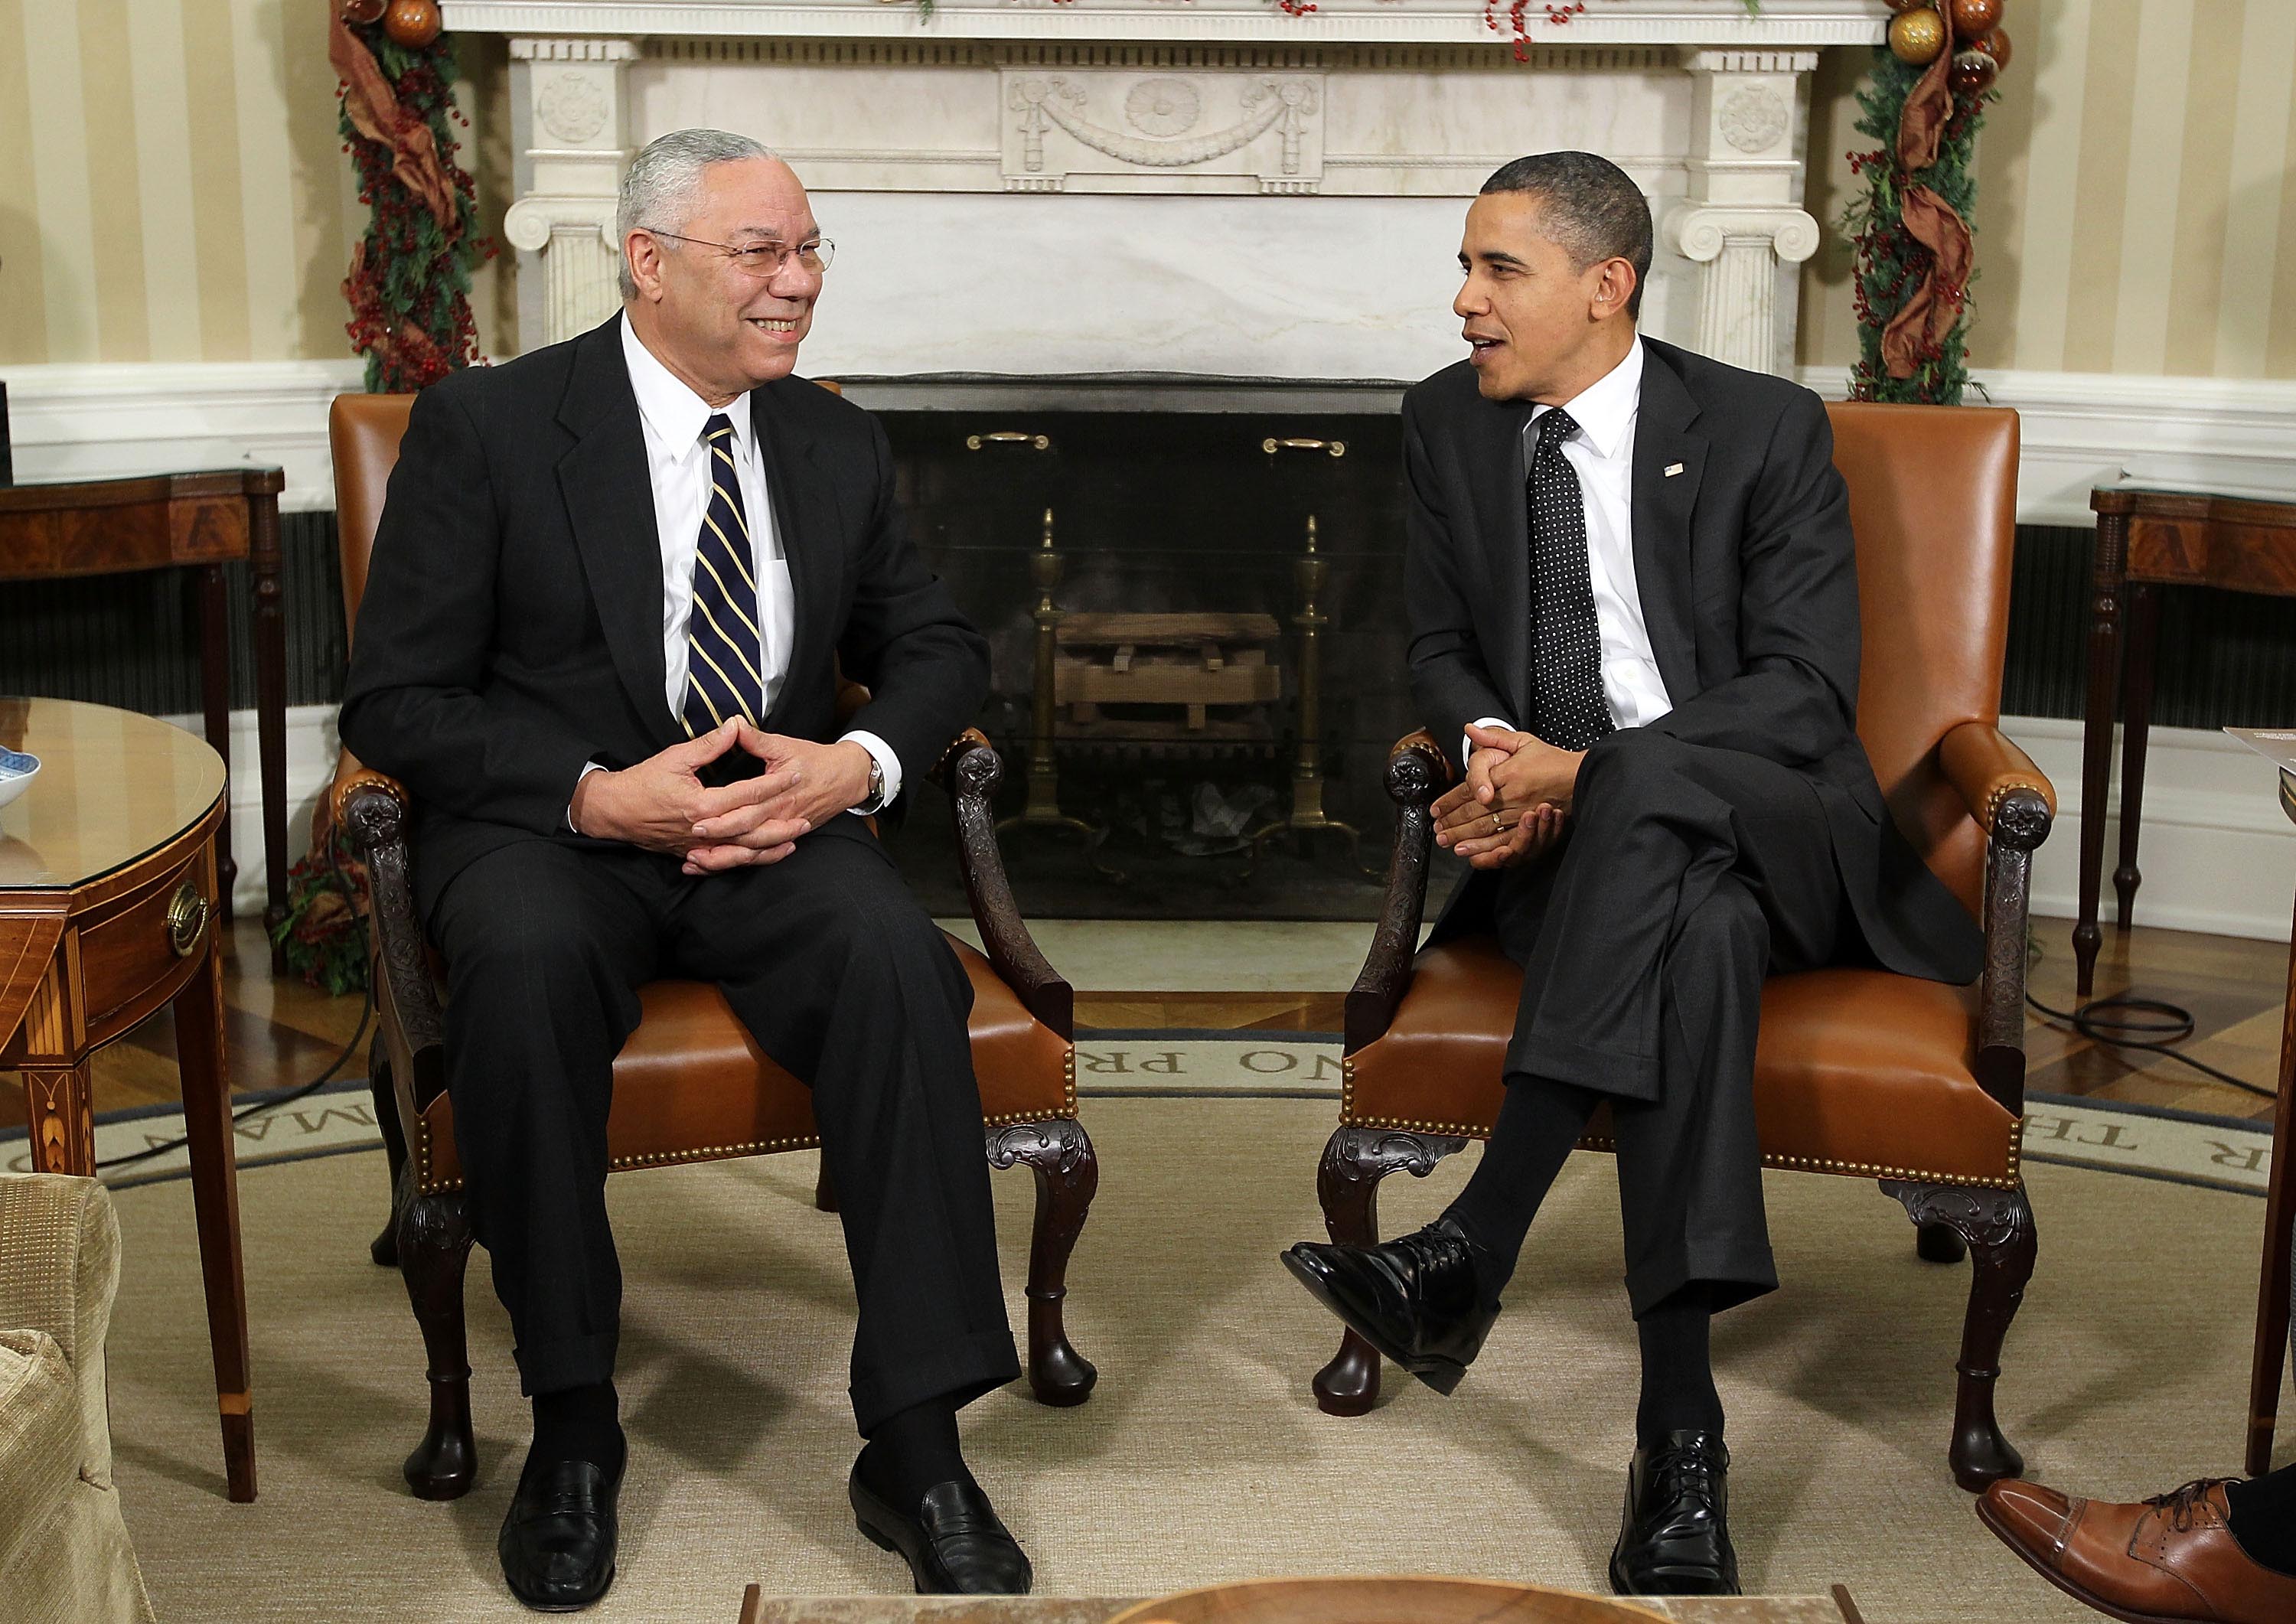 Then-President Barack Obama meets with former Secretary of State General Colin Powell in the Oval Office of the White House December 1, 2010 in Washington, DC.  